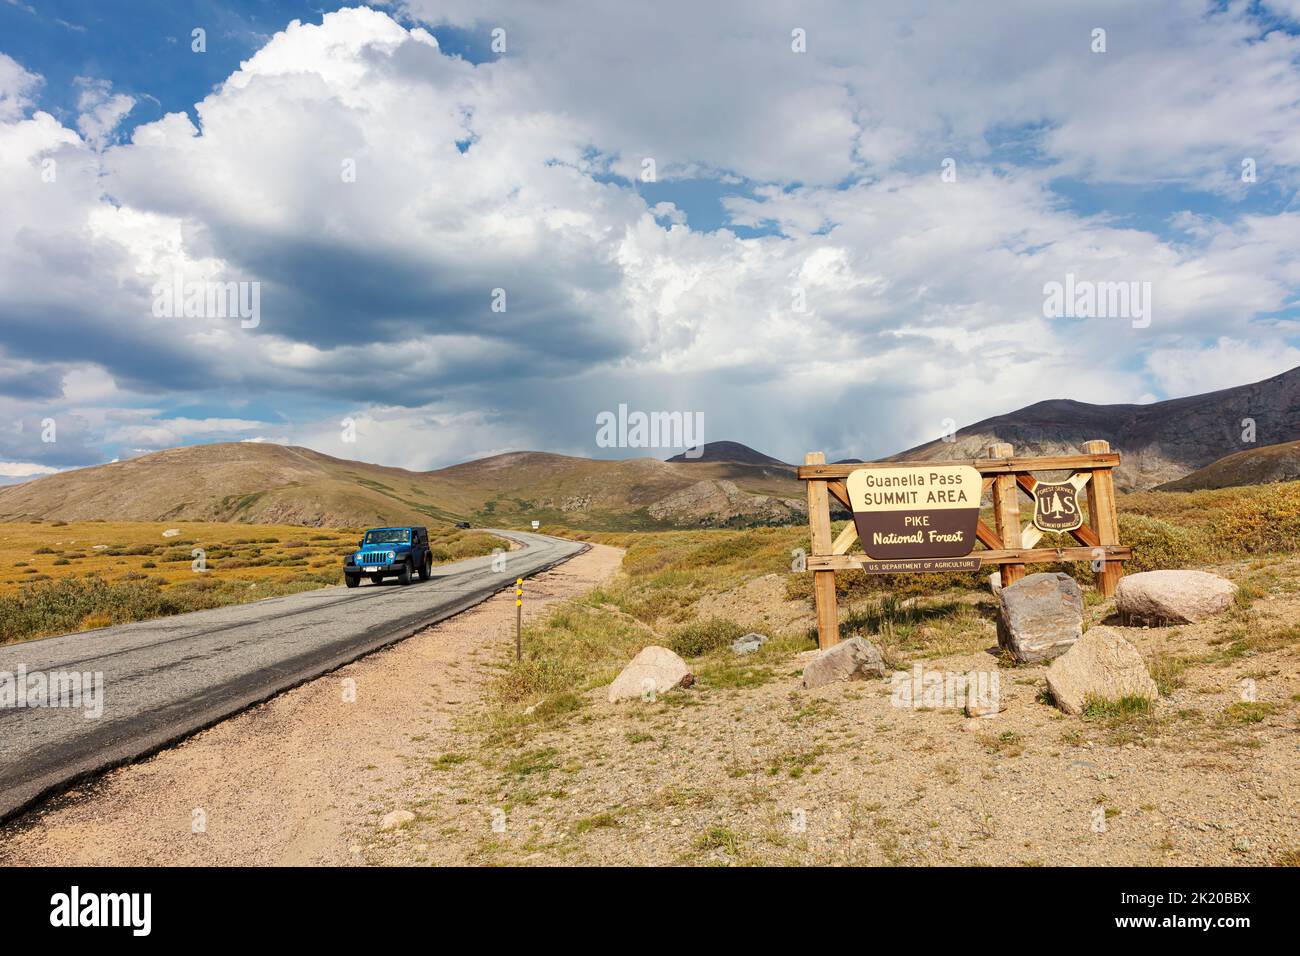 Guanella Pass Summit Area sign, Pike National Forest, Colorado Stock Photo